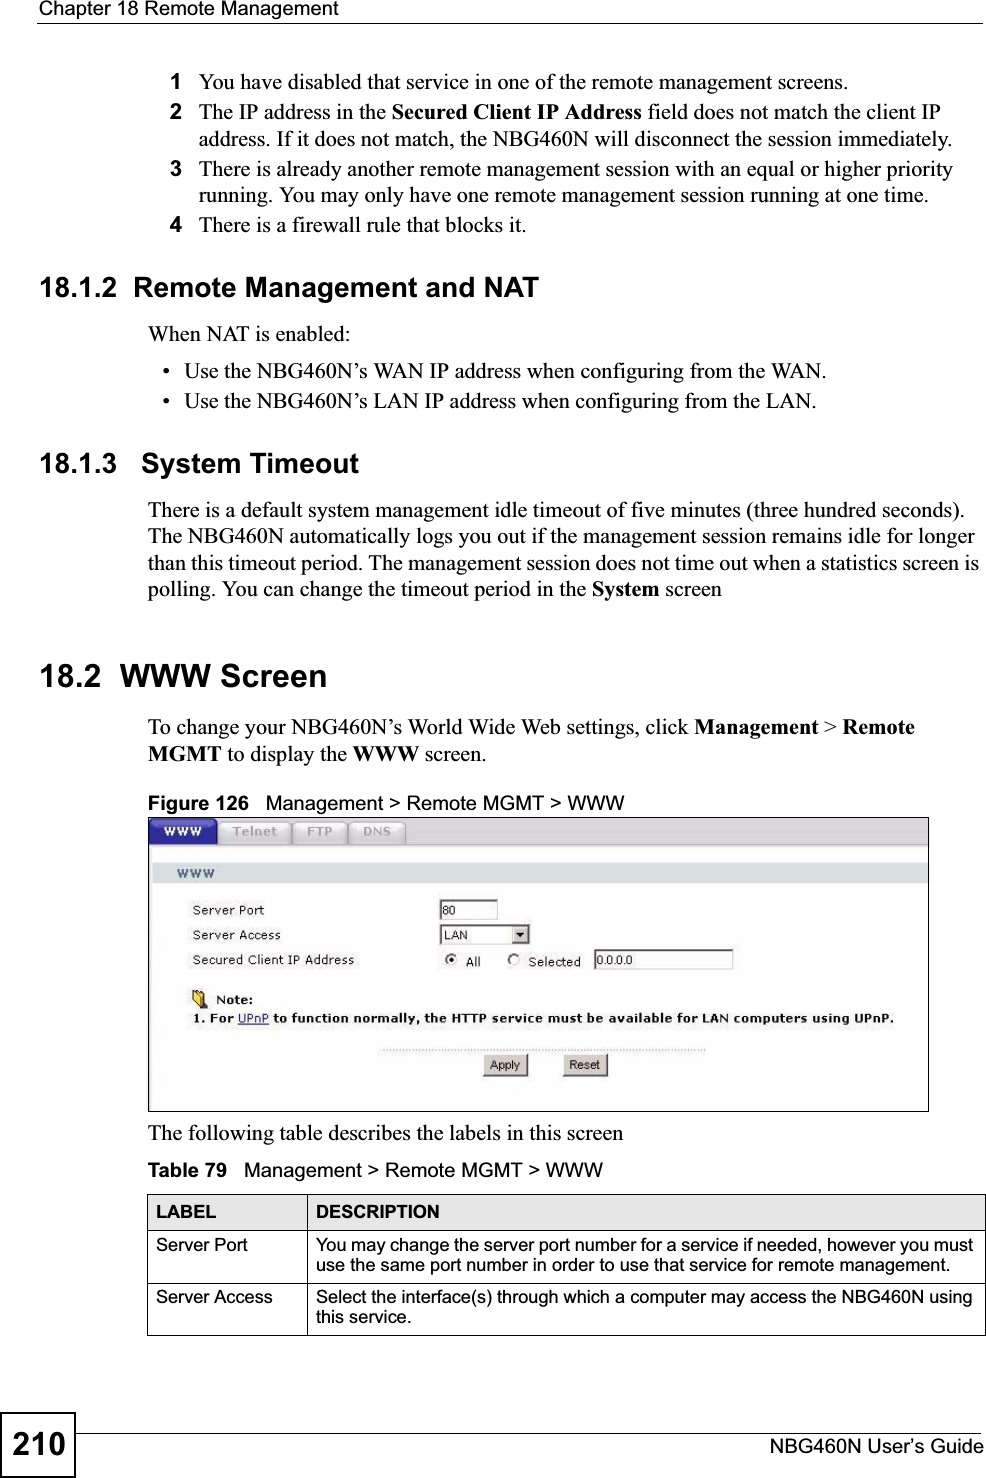 Chapter 18 Remote ManagementNBG460N User’s Guide2101You have disabled that service in one of the remote management screens.2The IP address in the Secured Client IP Address field does not match the client IP address. If it does not match, the NBG460N will disconnect the session immediately.3There is already another remote management session with an equal or higher priority running. You may only have one remote management session running at one time.4There is a firewall rule that blocks it.18.1.2  Remote Management and NATWhen NAT is enabled:• Use the NBG460N’s WAN IP address when configuring from the WAN. • Use the NBG460N’s LAN IP address when configuring from the LAN.18.1.3   System TimeoutThere is a default system management idle timeout of five minutes (three hundred seconds). The NBG460N automatically logs you out if the management session remains idle for longer than this timeout period. The management session does not time out when a statistics screen is polling. You can change the timeout period in the System screen18.2  WWW ScreenTo change your NBG460N’s World Wide Web settings, click Management &gt; Remote MGMT to display the WWW screen.Figure 126   Management &gt; Remote MGMT &gt; WWW The following table describes the labels in this screenTable 79   Management &gt; Remote MGMT &gt; WWWLABEL DESCRIPTIONServer Port You may change the server port number for a service if needed, however you must use the same port number in order to use that service for remote management.Server Access Select the interface(s) through which a computer may access the NBG460N using this service.